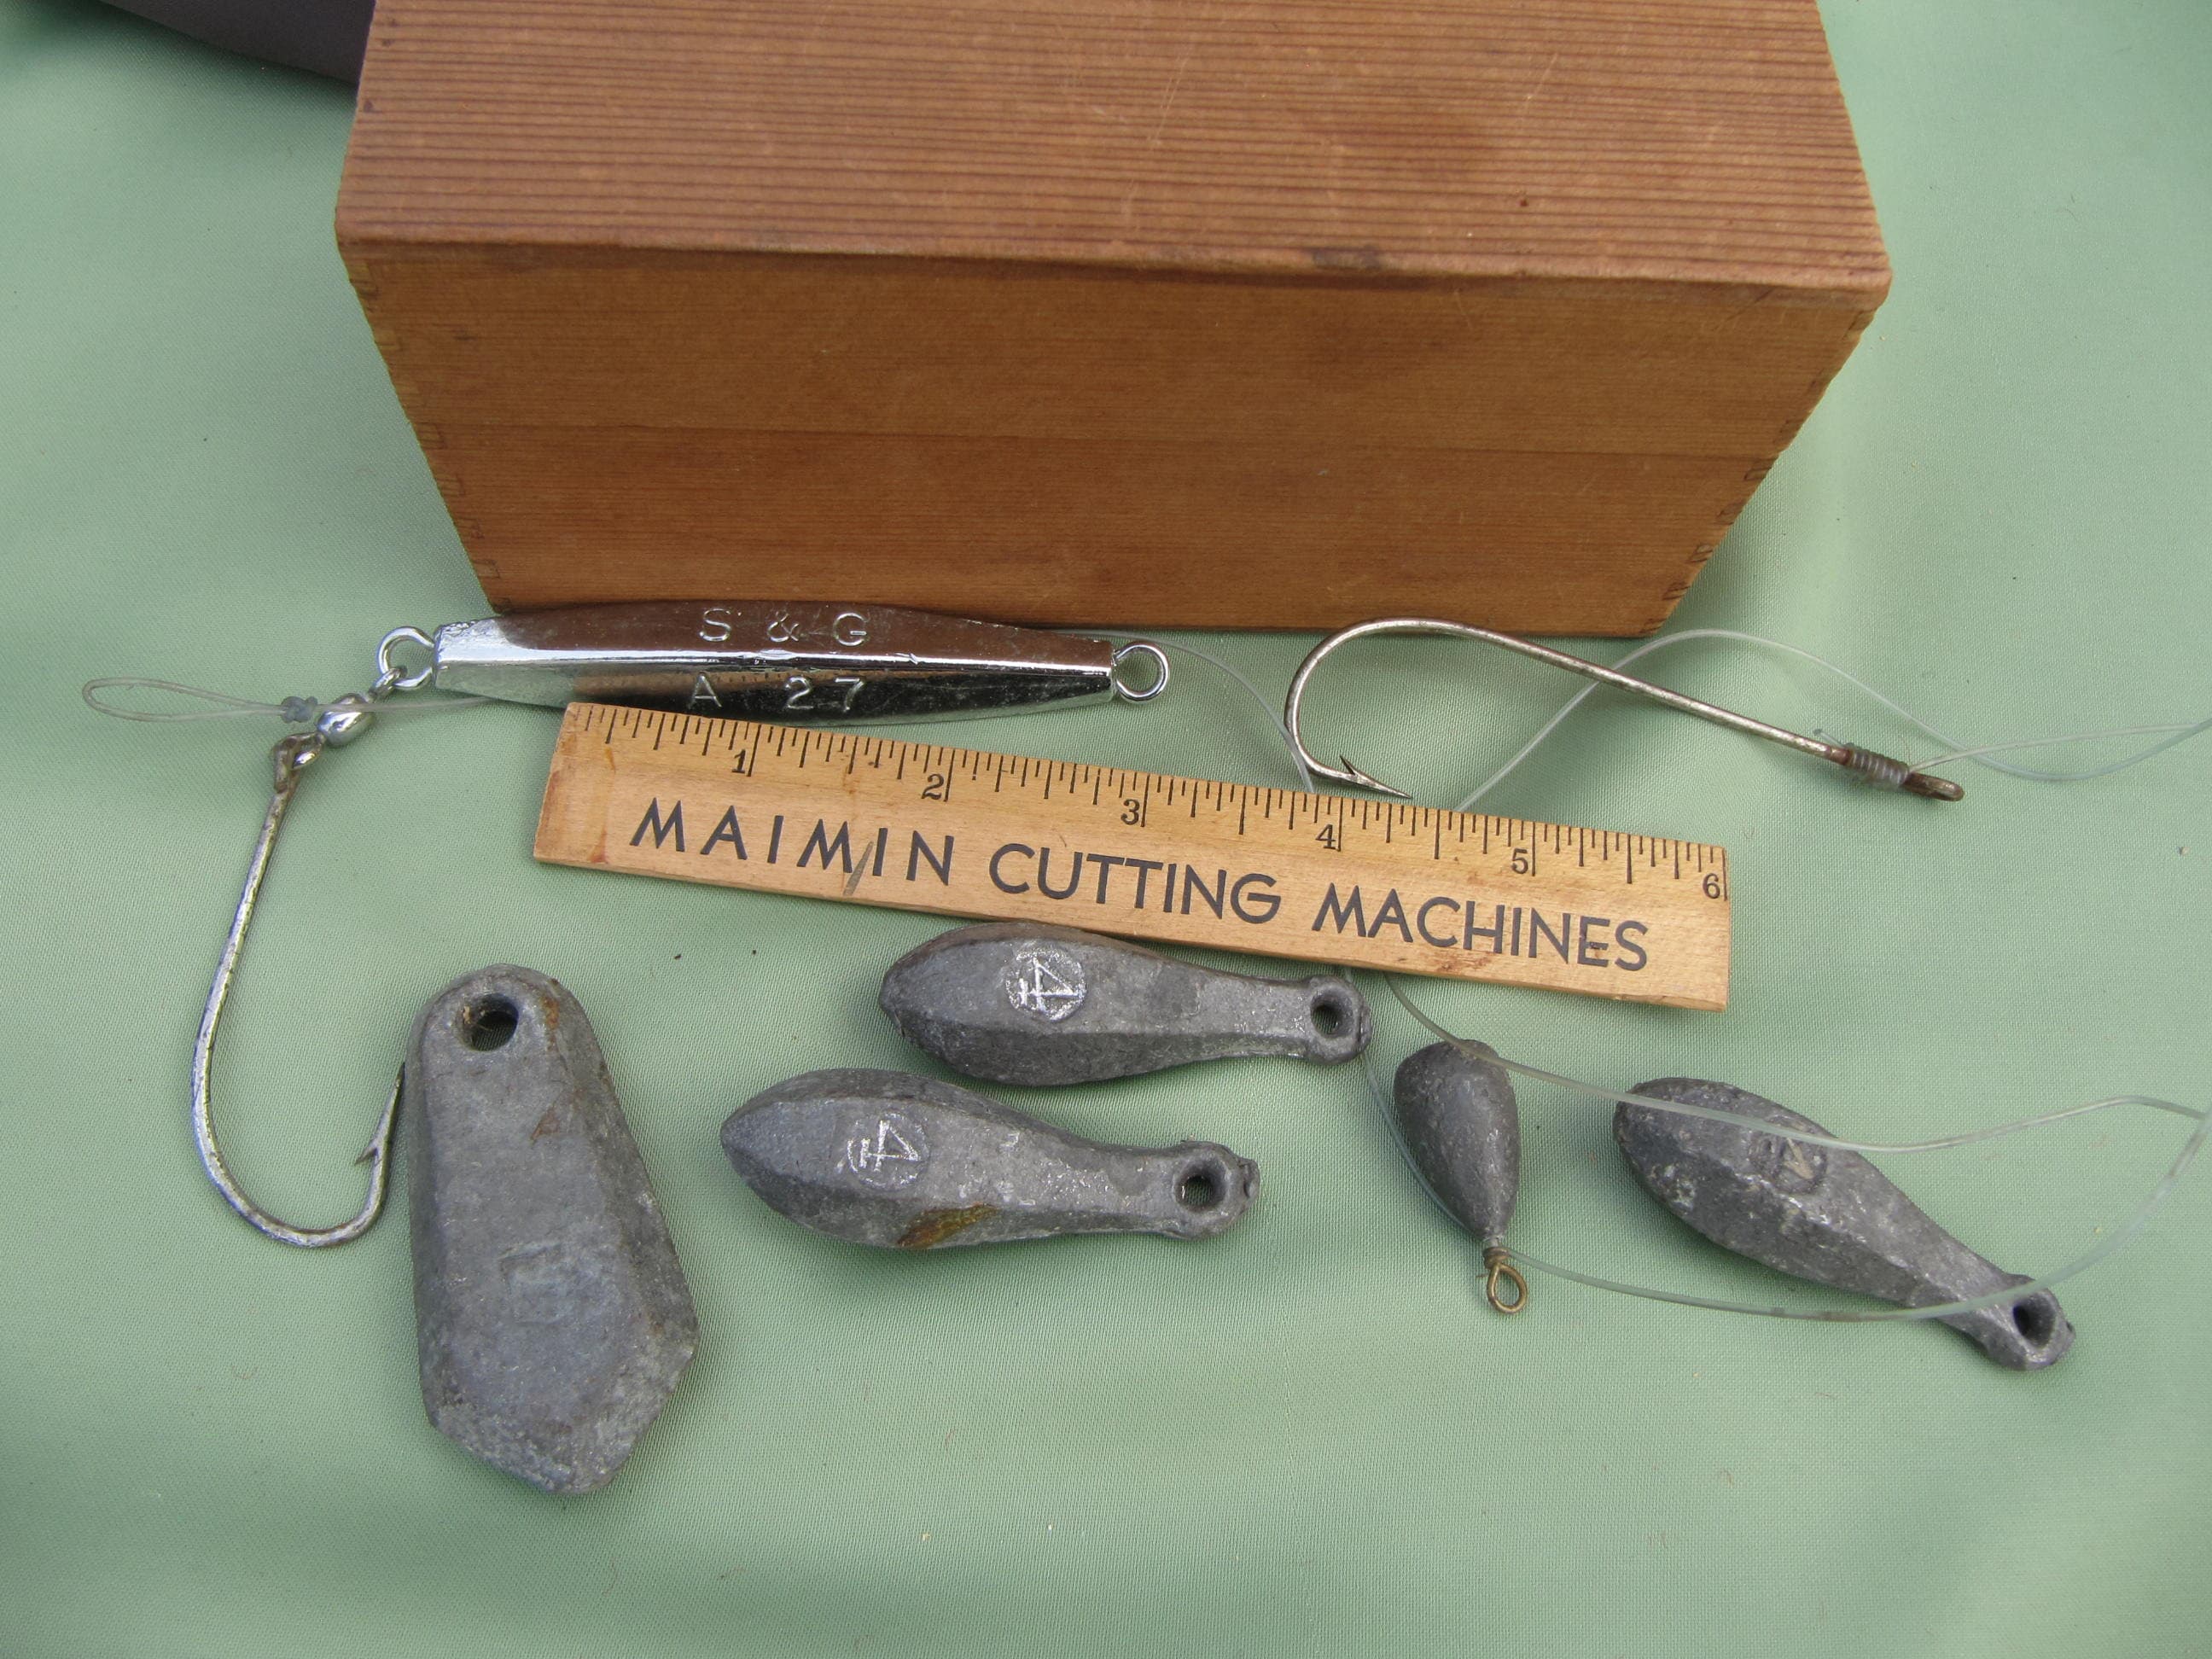 Vintage Lead Fishing Weights 